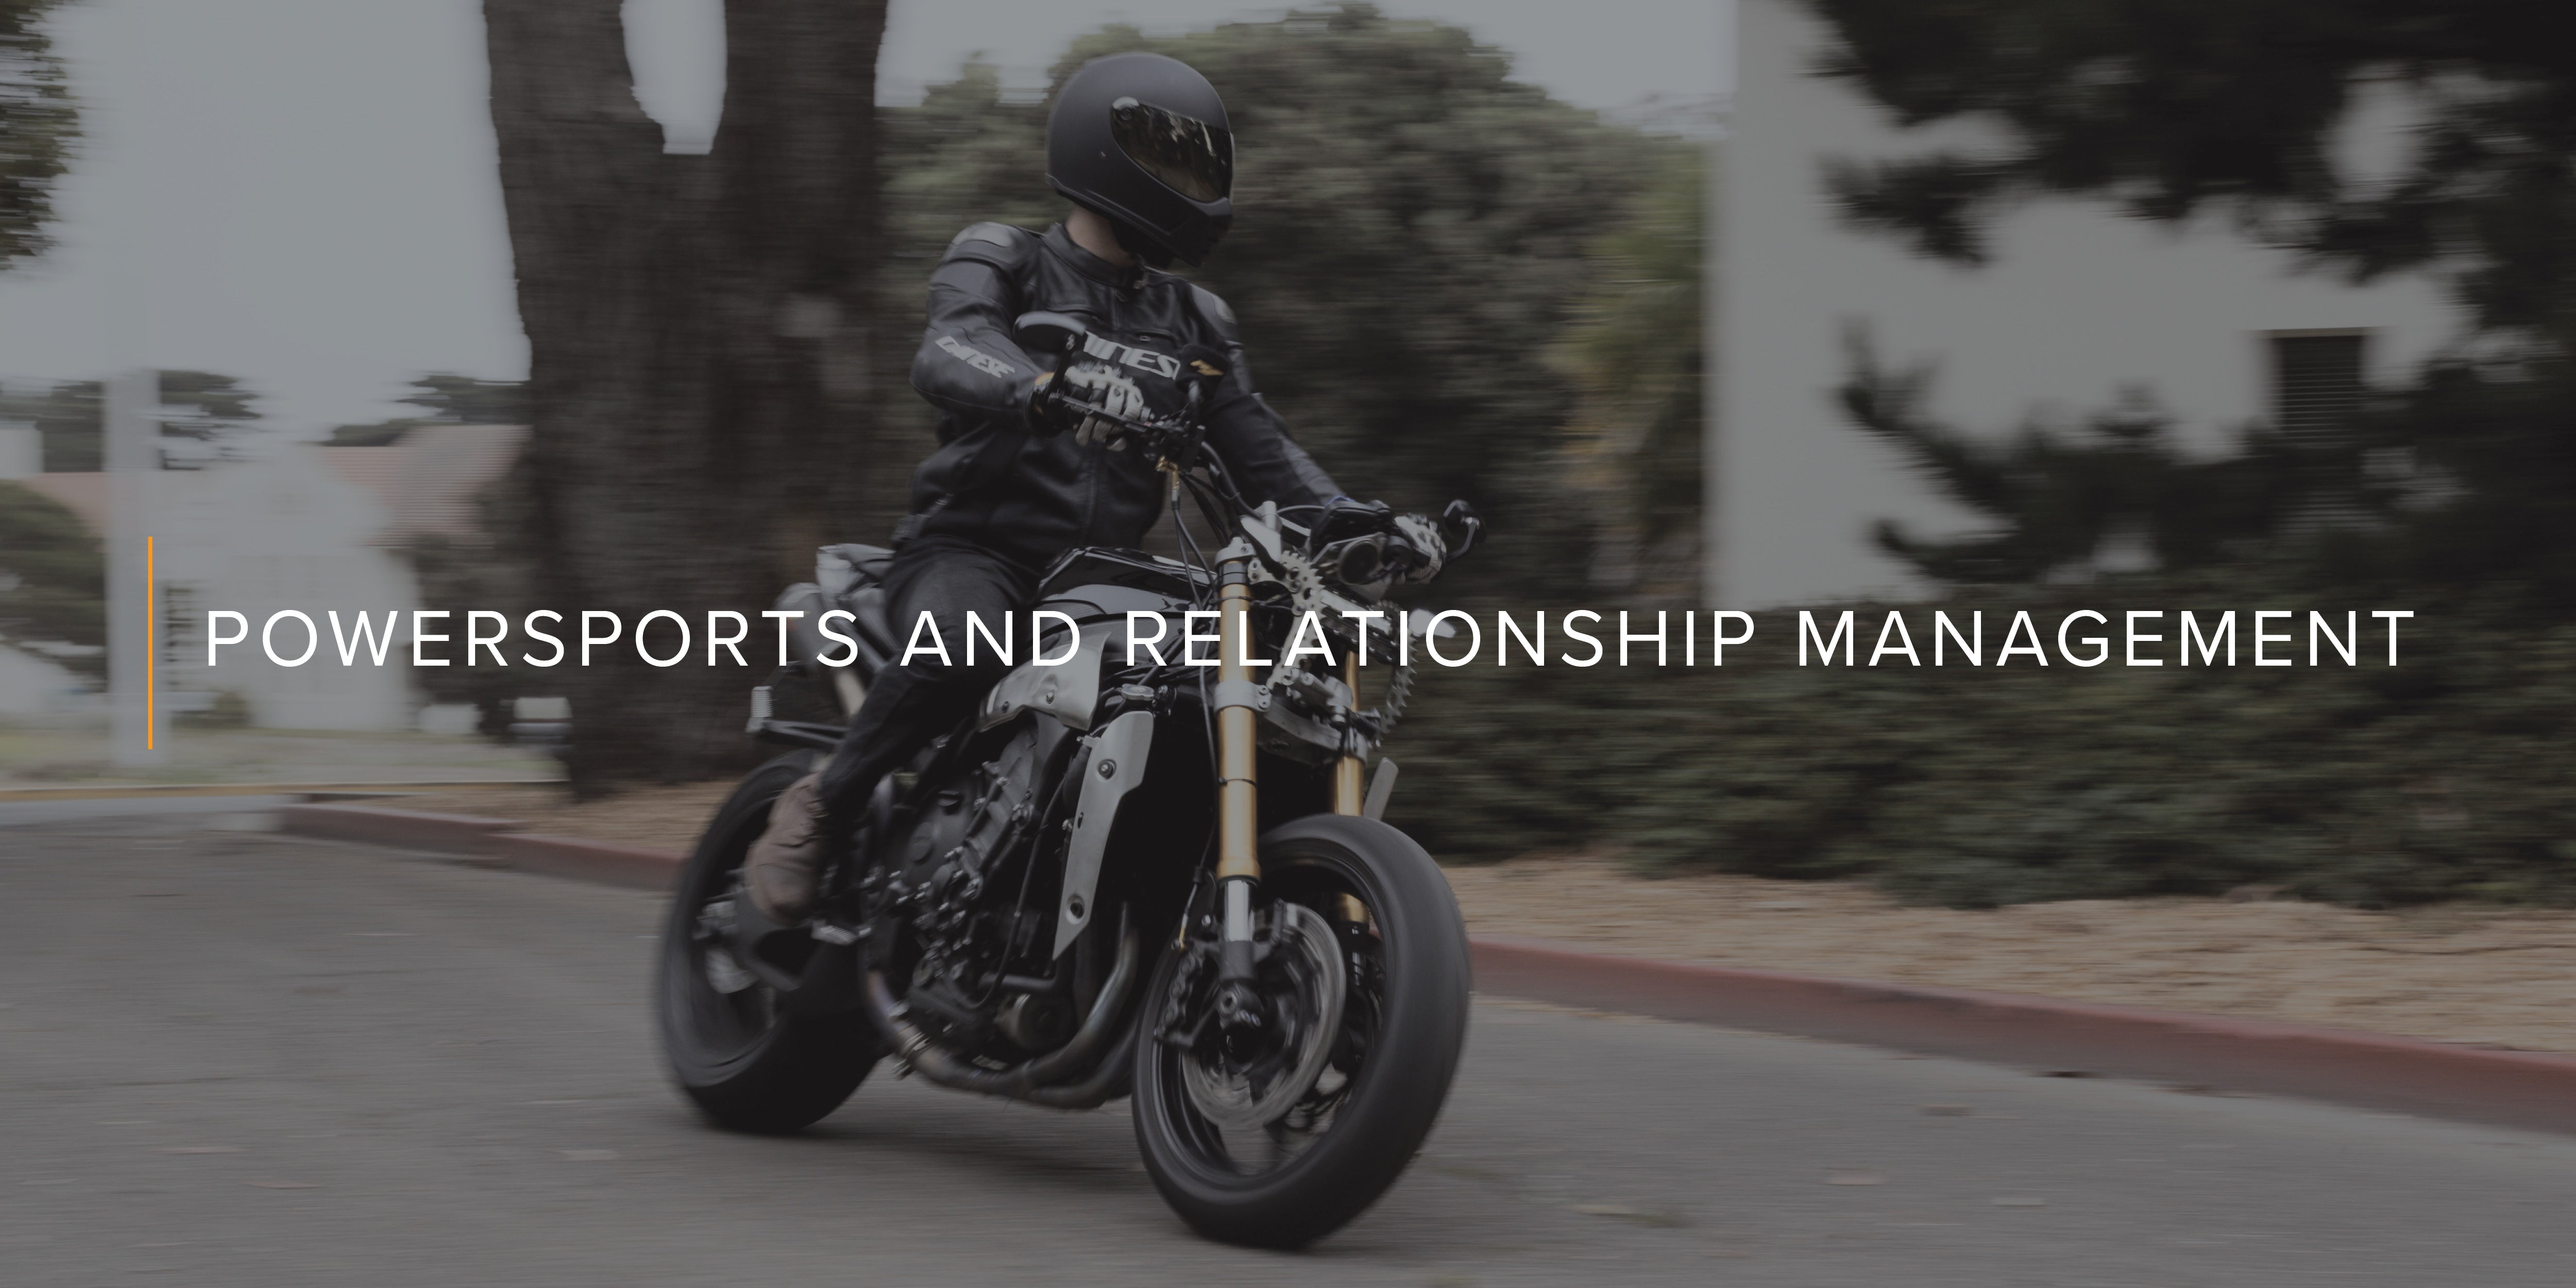 Powersports and Relationship Management